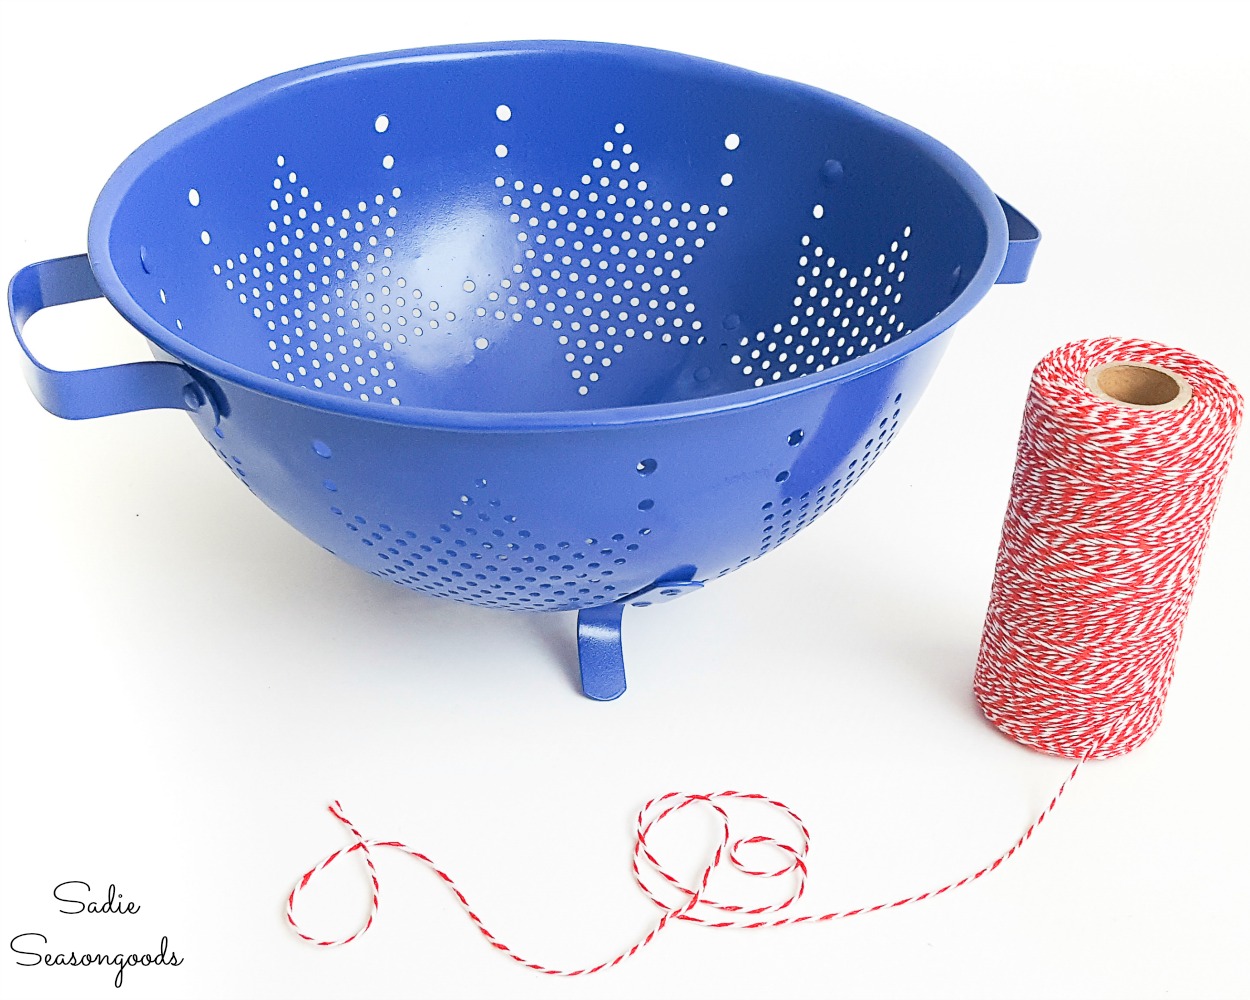 Bakers twine to do the star embroidery on a vintage colander